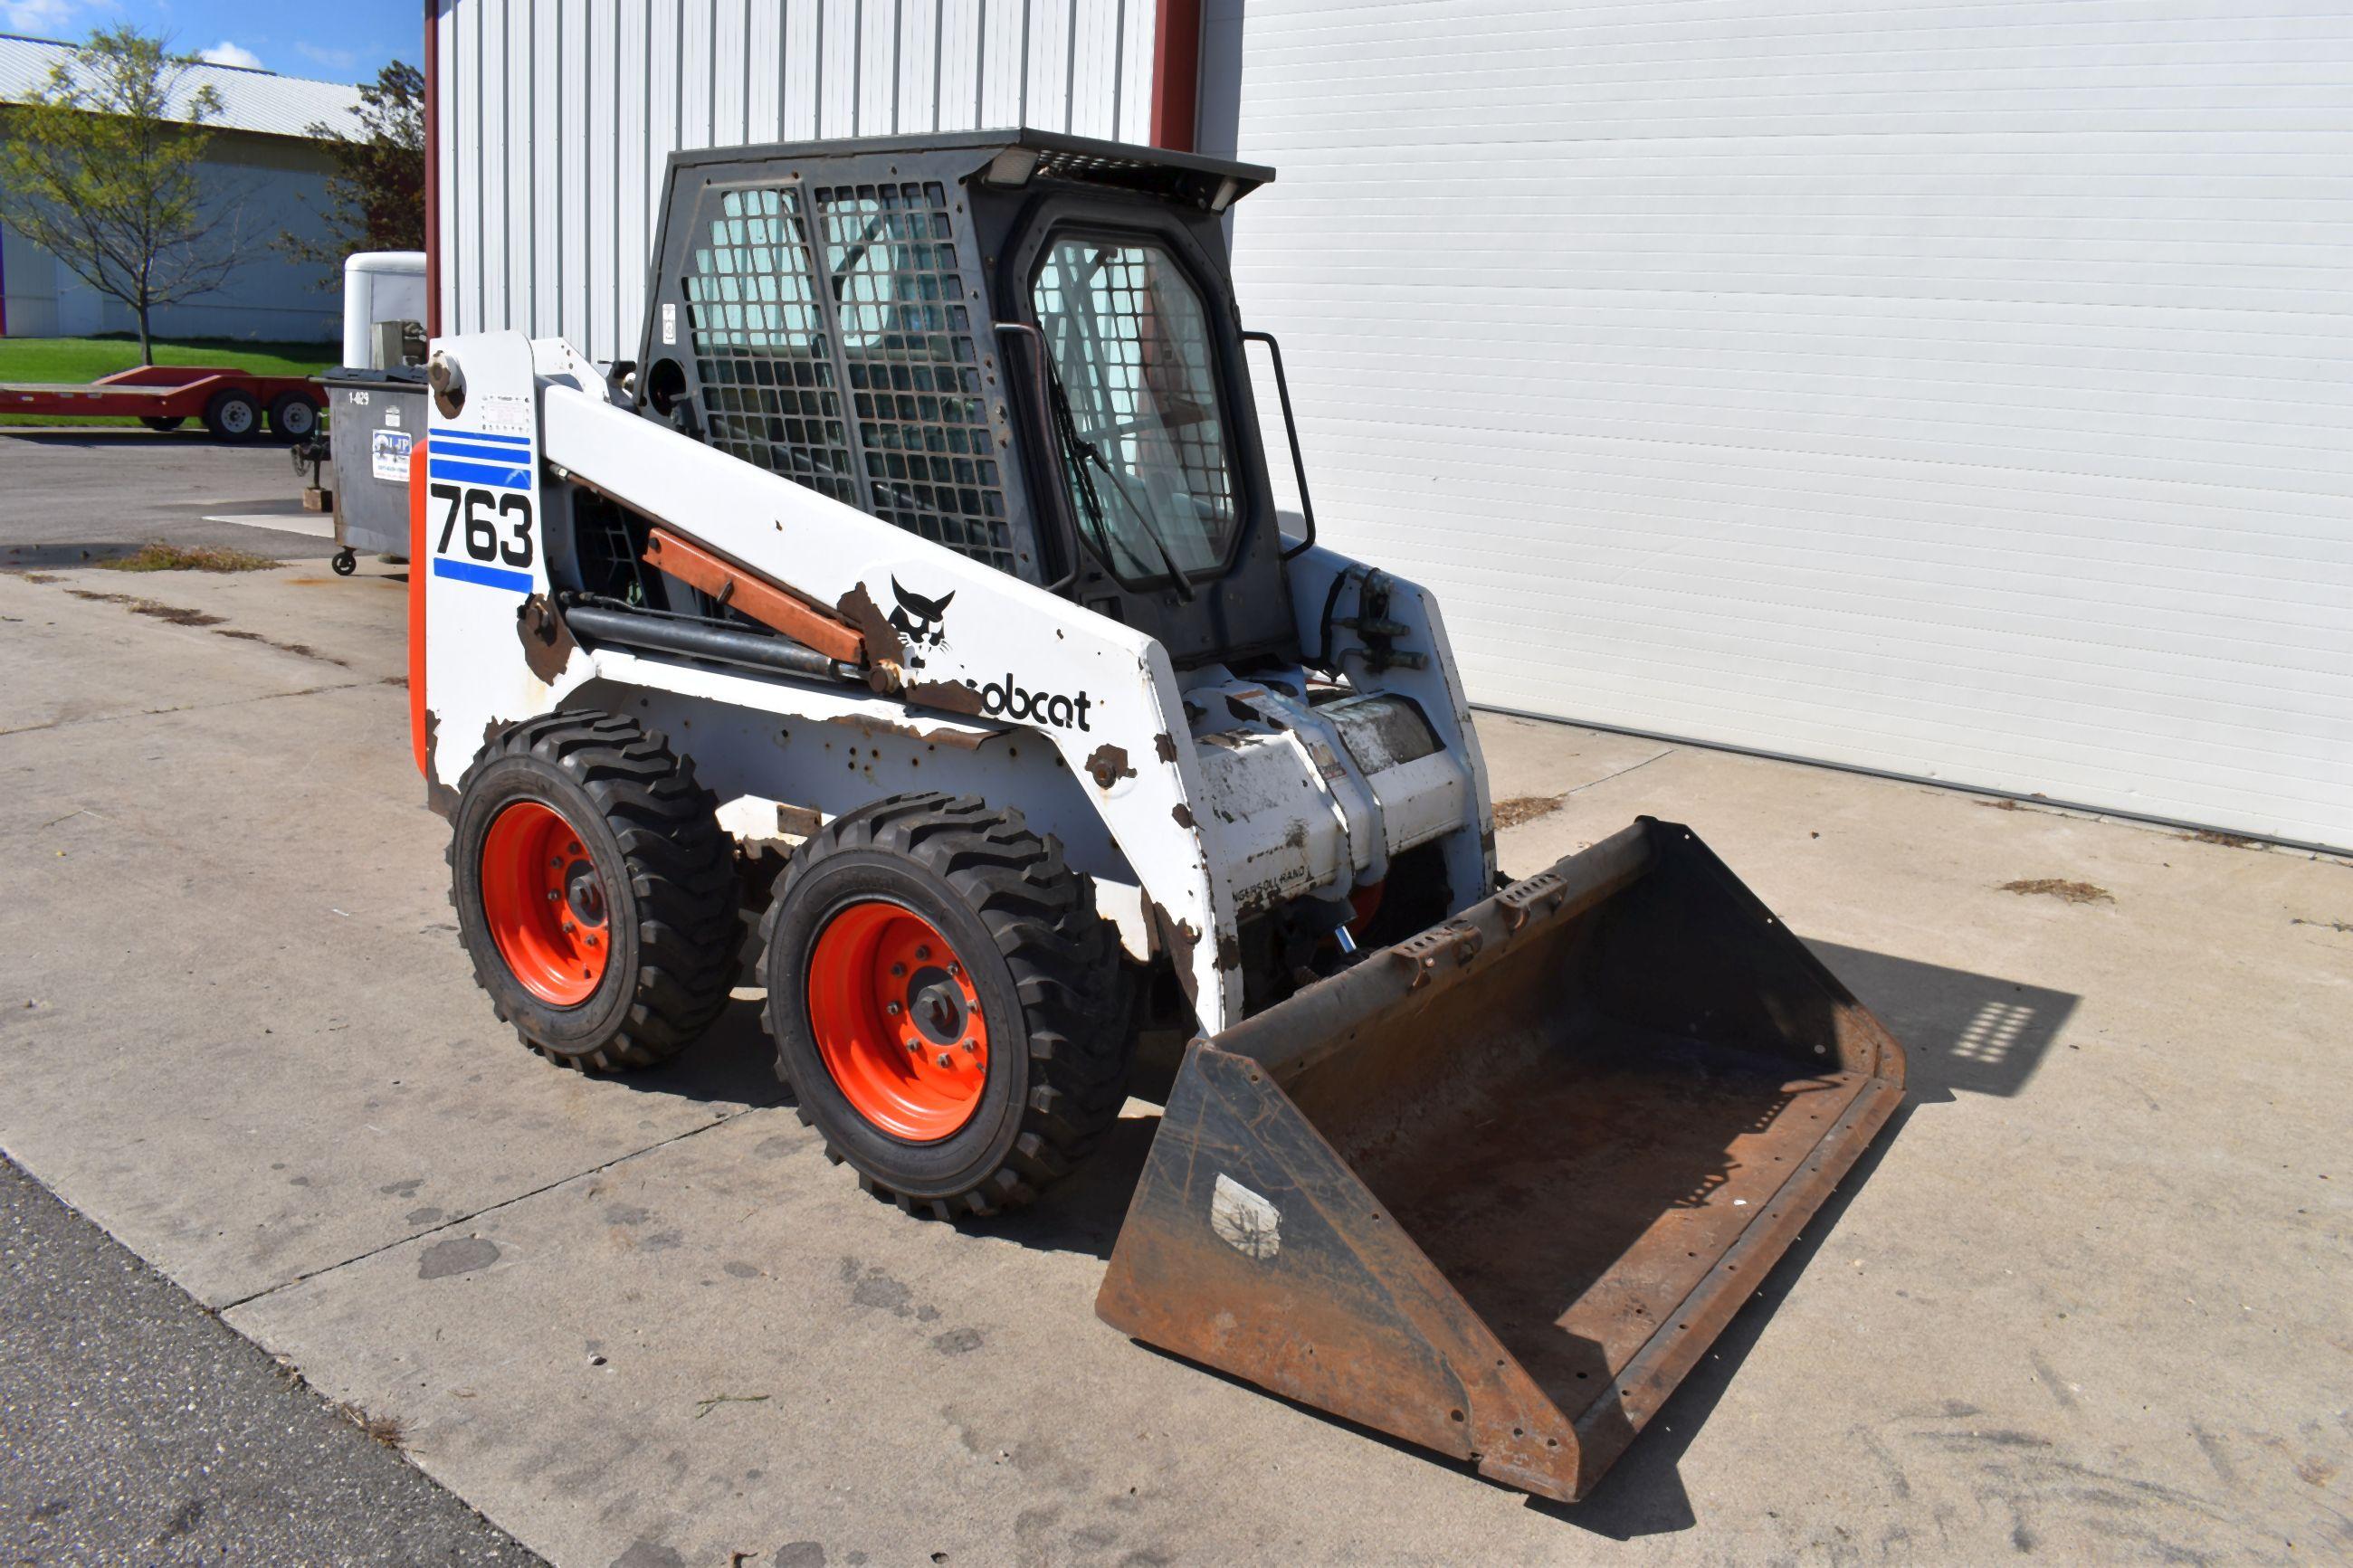 Bobcat 763 Diesel Skid Loader With 1491 Hours, New Tires, Auxiliary Hydraulics, Hand/Foot Controls,